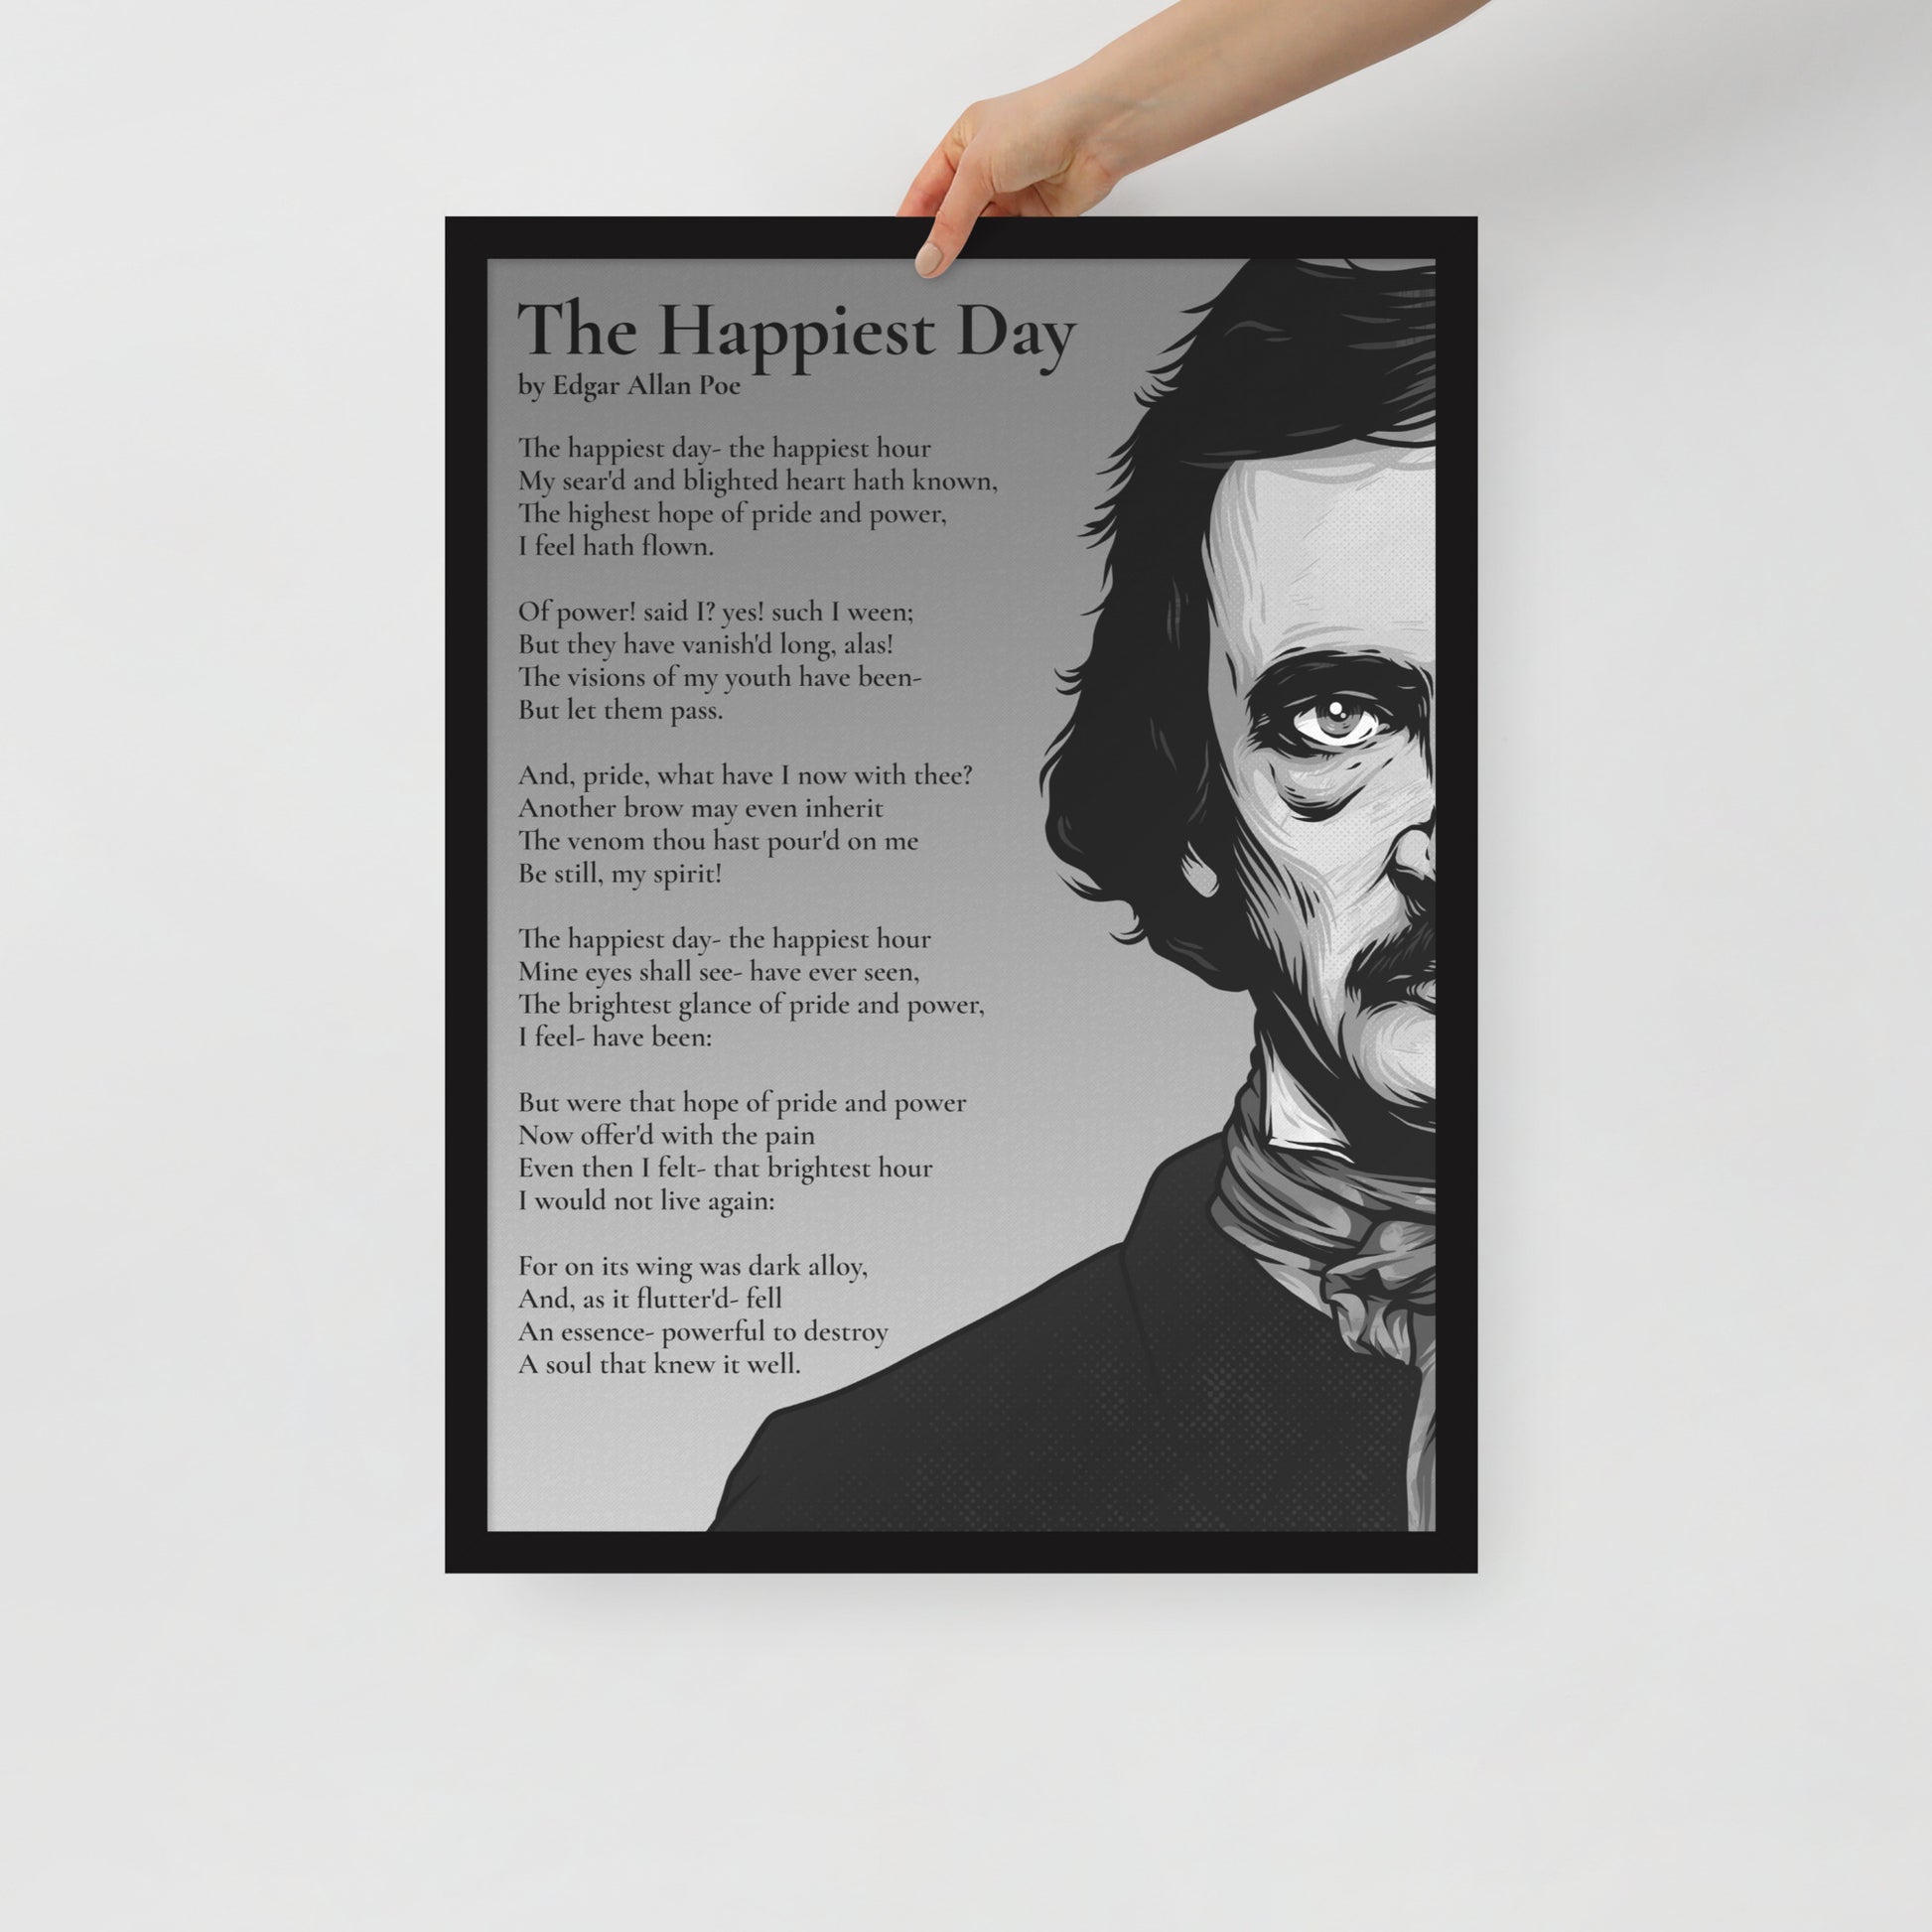 Edgar Allan Poe's 'The Happiest Day' Framed Matted Poster - 18 x 24 Black Frame